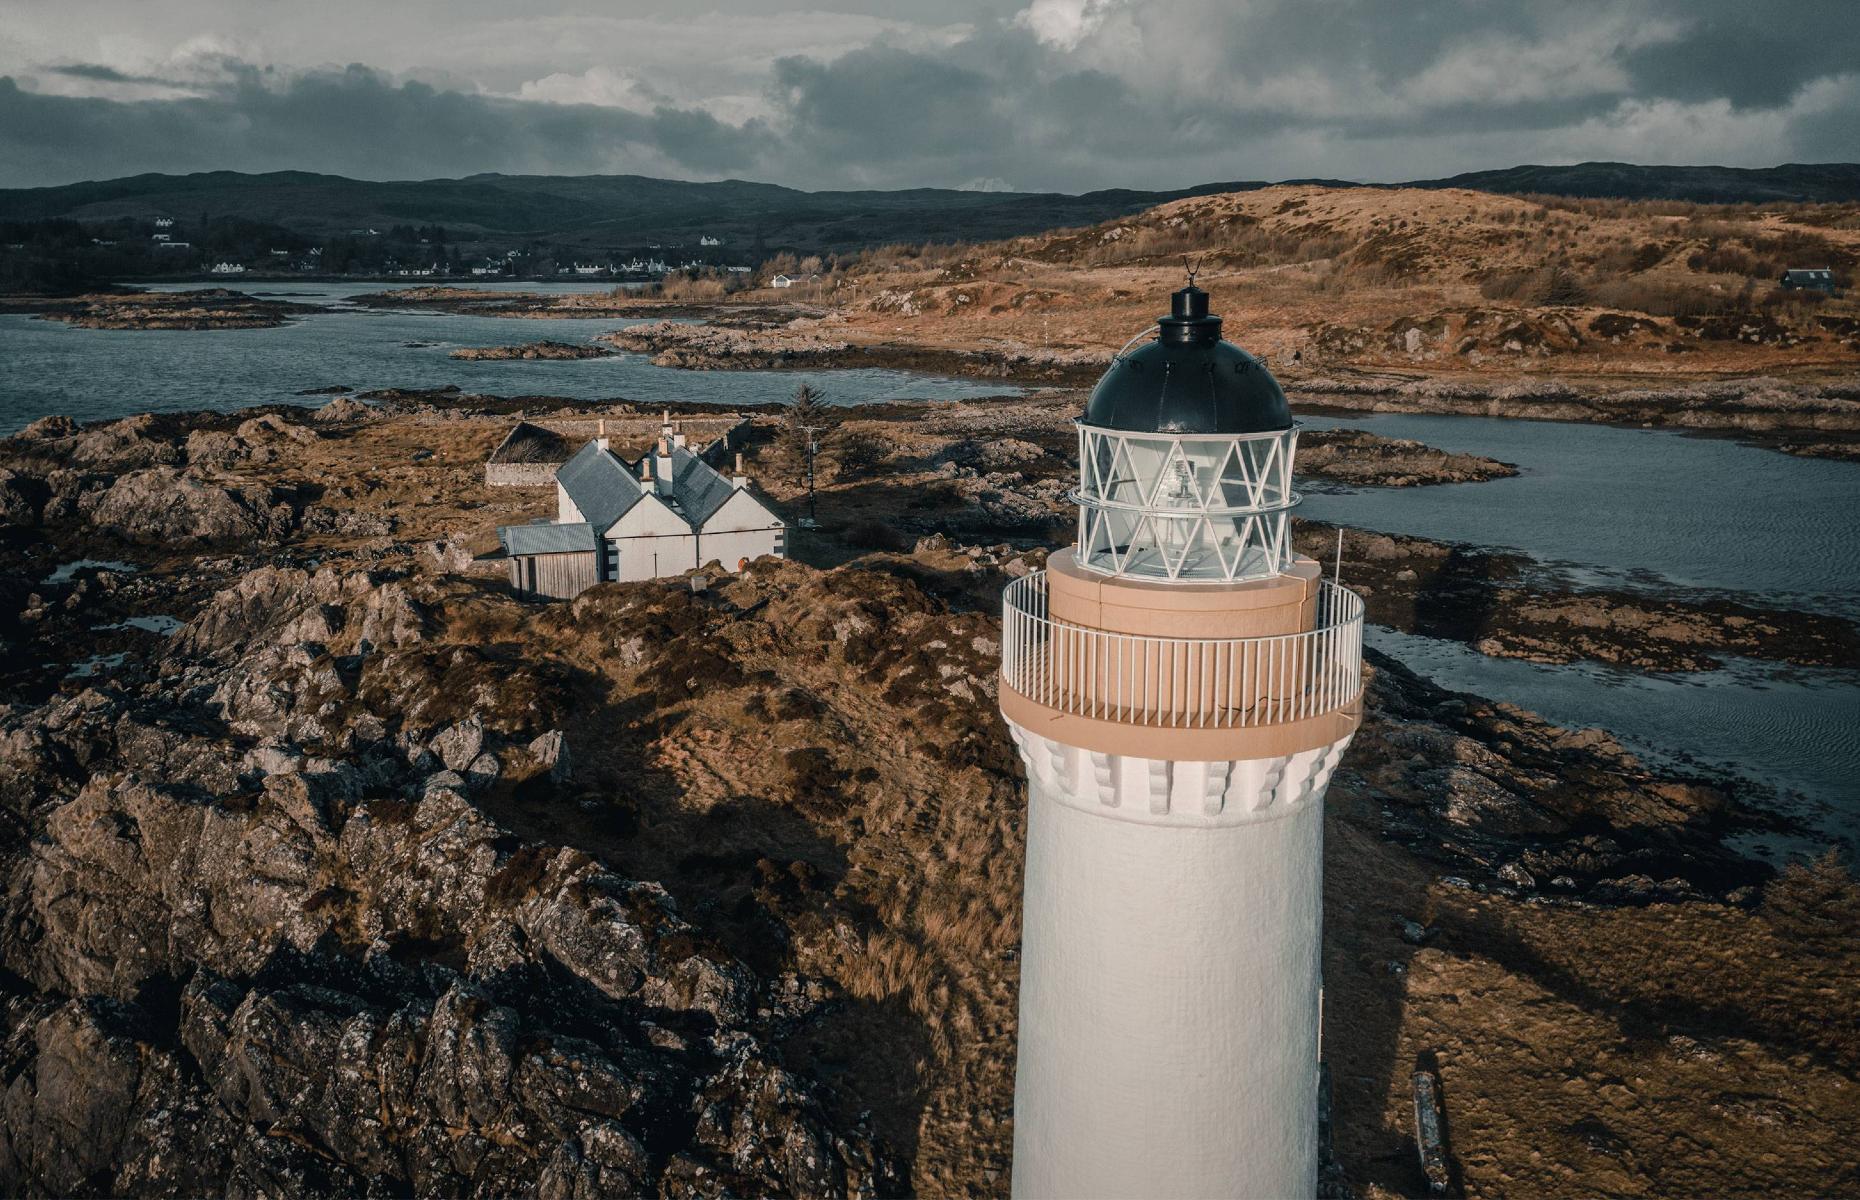 Located just off the rugged Isle of Skye, the largest of Scotland’s Inner Hebrides, this isolated island can only be accessed by boat or on foot (when the tide is out). Its four-bedroom cottage can sleep up to eight people.